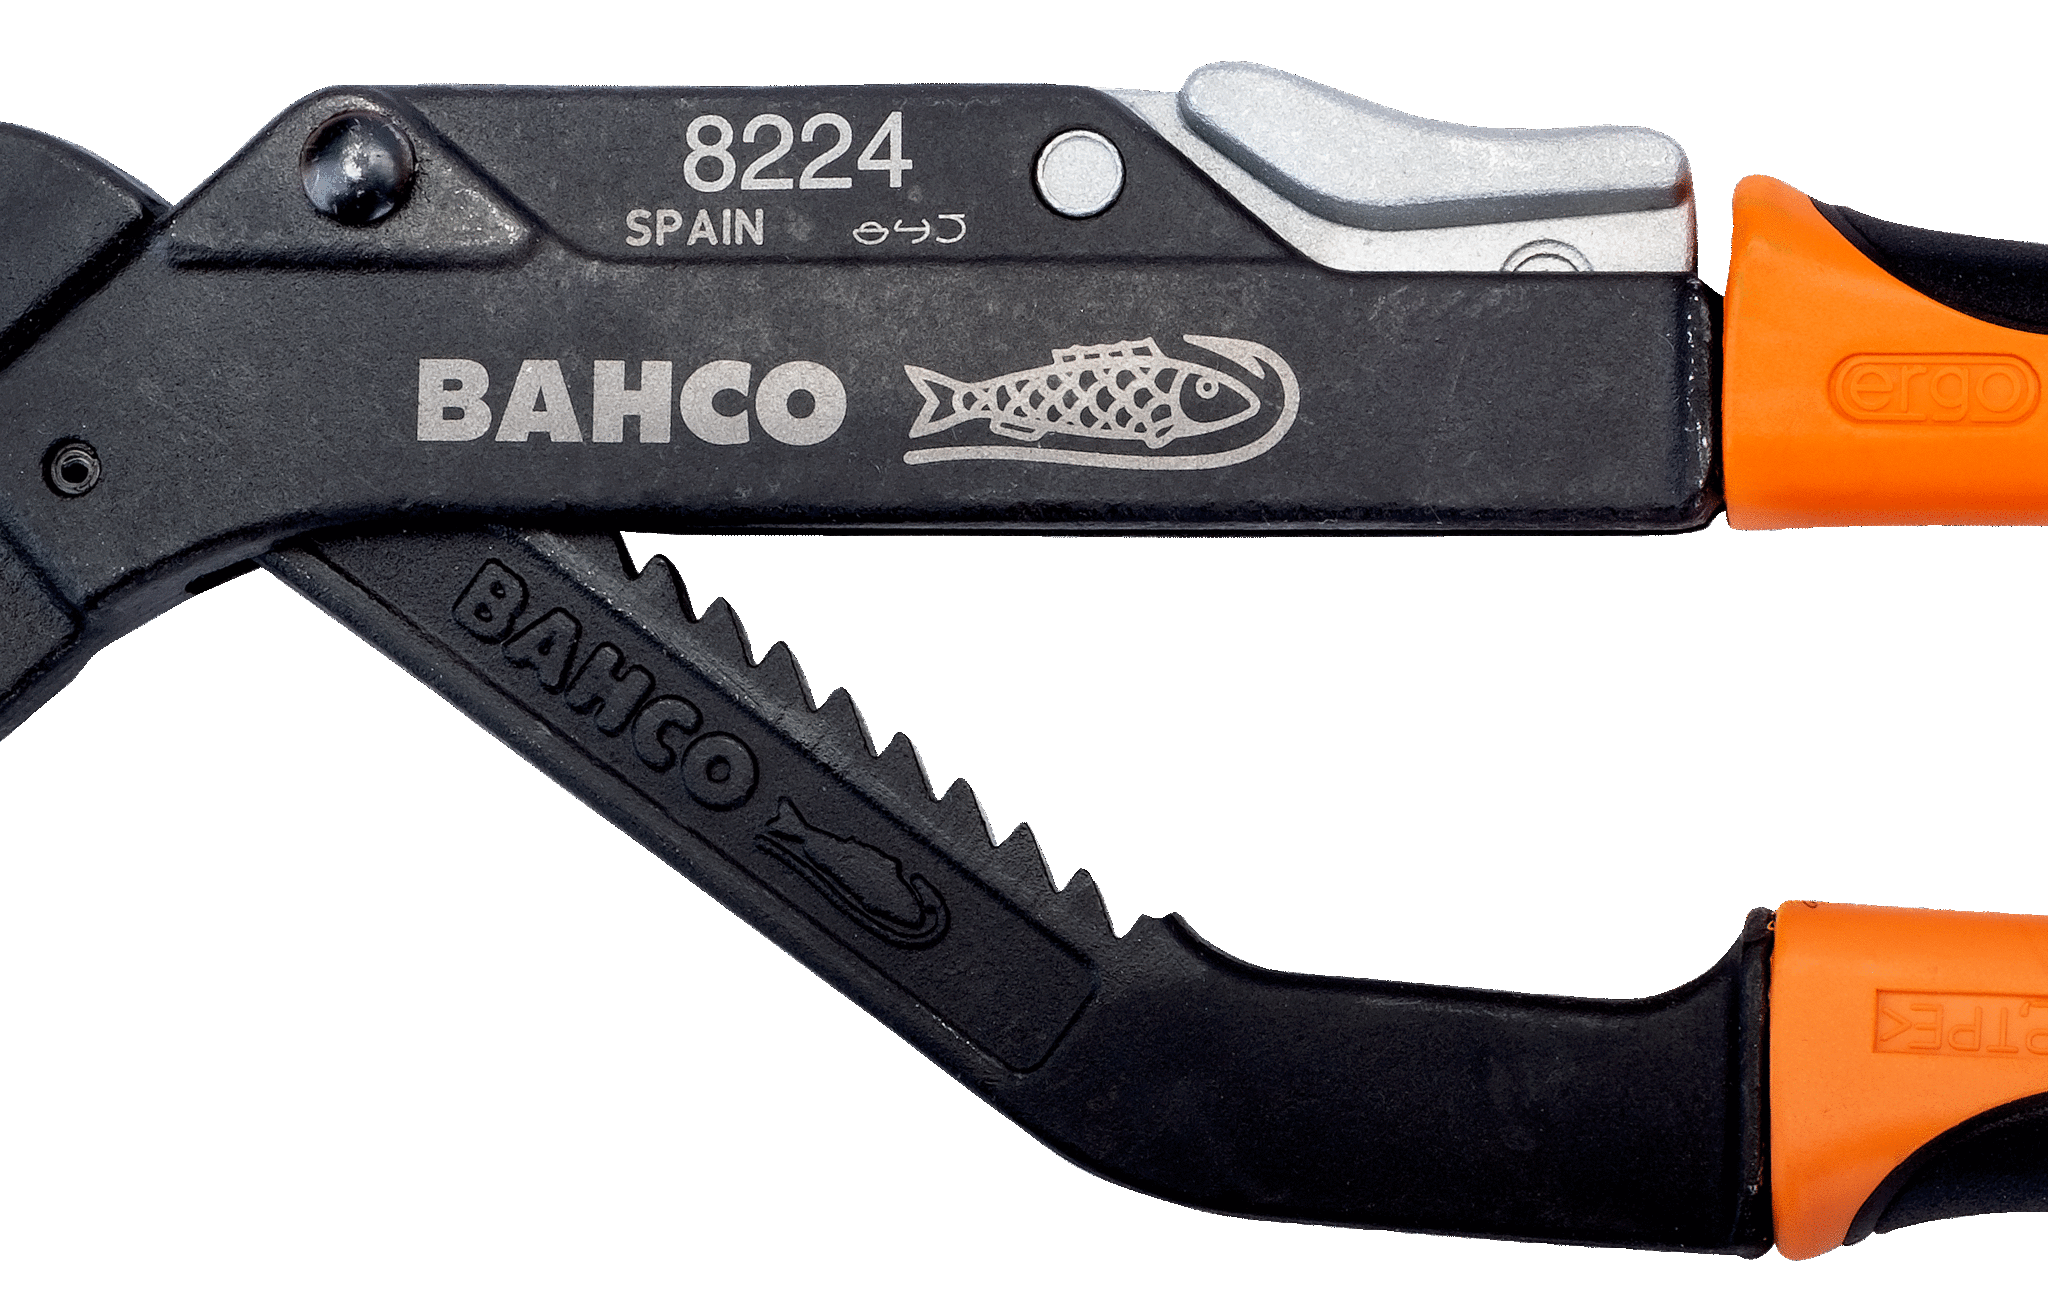 ERGO™ Slip Joint Water Pump Pliers with Dual-Component Handles and Phosphate Finish - 8225 by Bahco